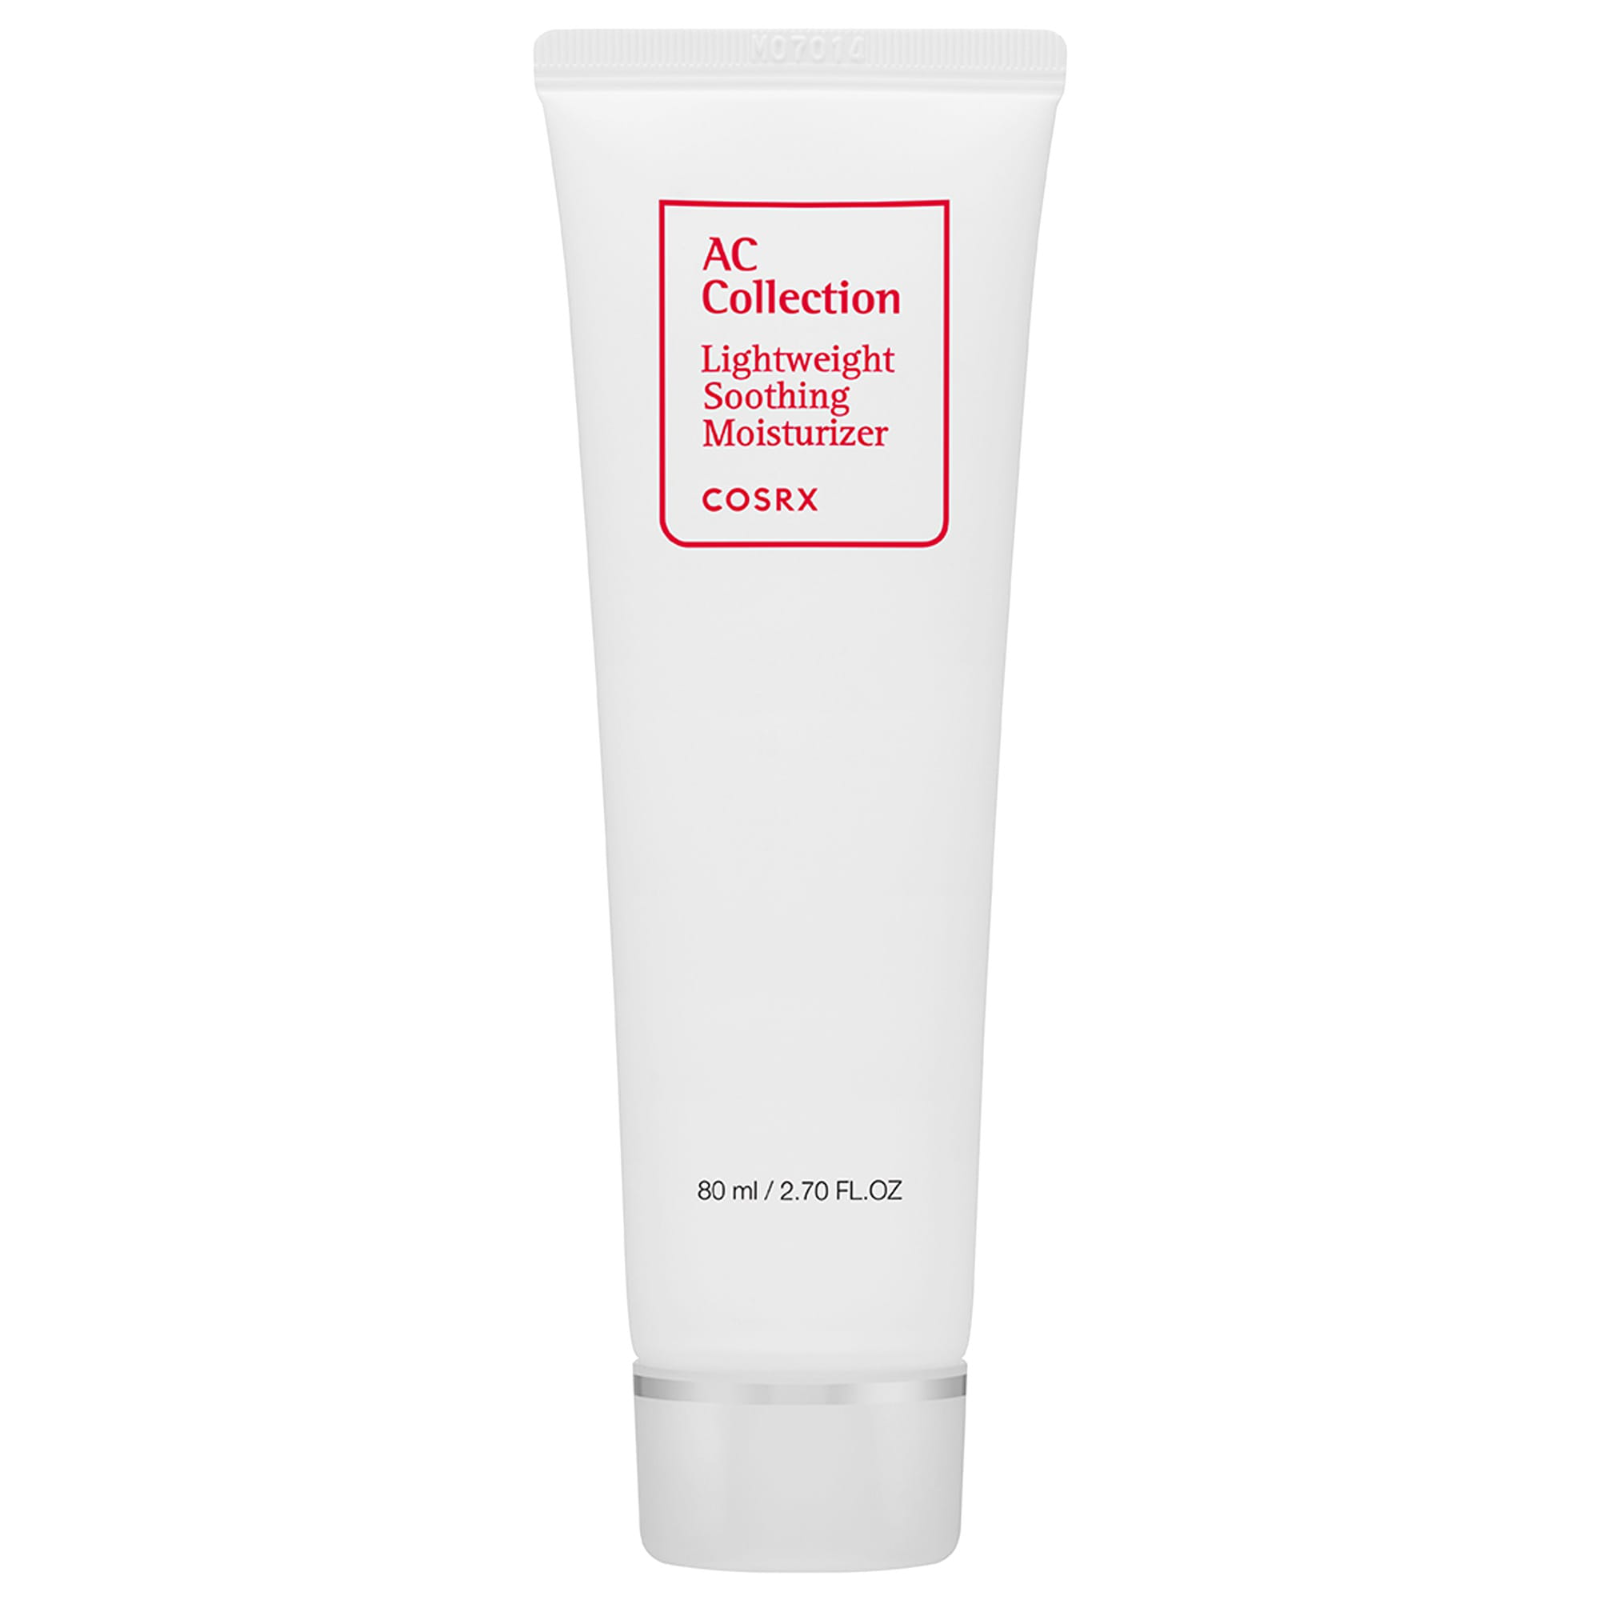 COSRX AC Collection Lightweight Soothing Moisturizer v1